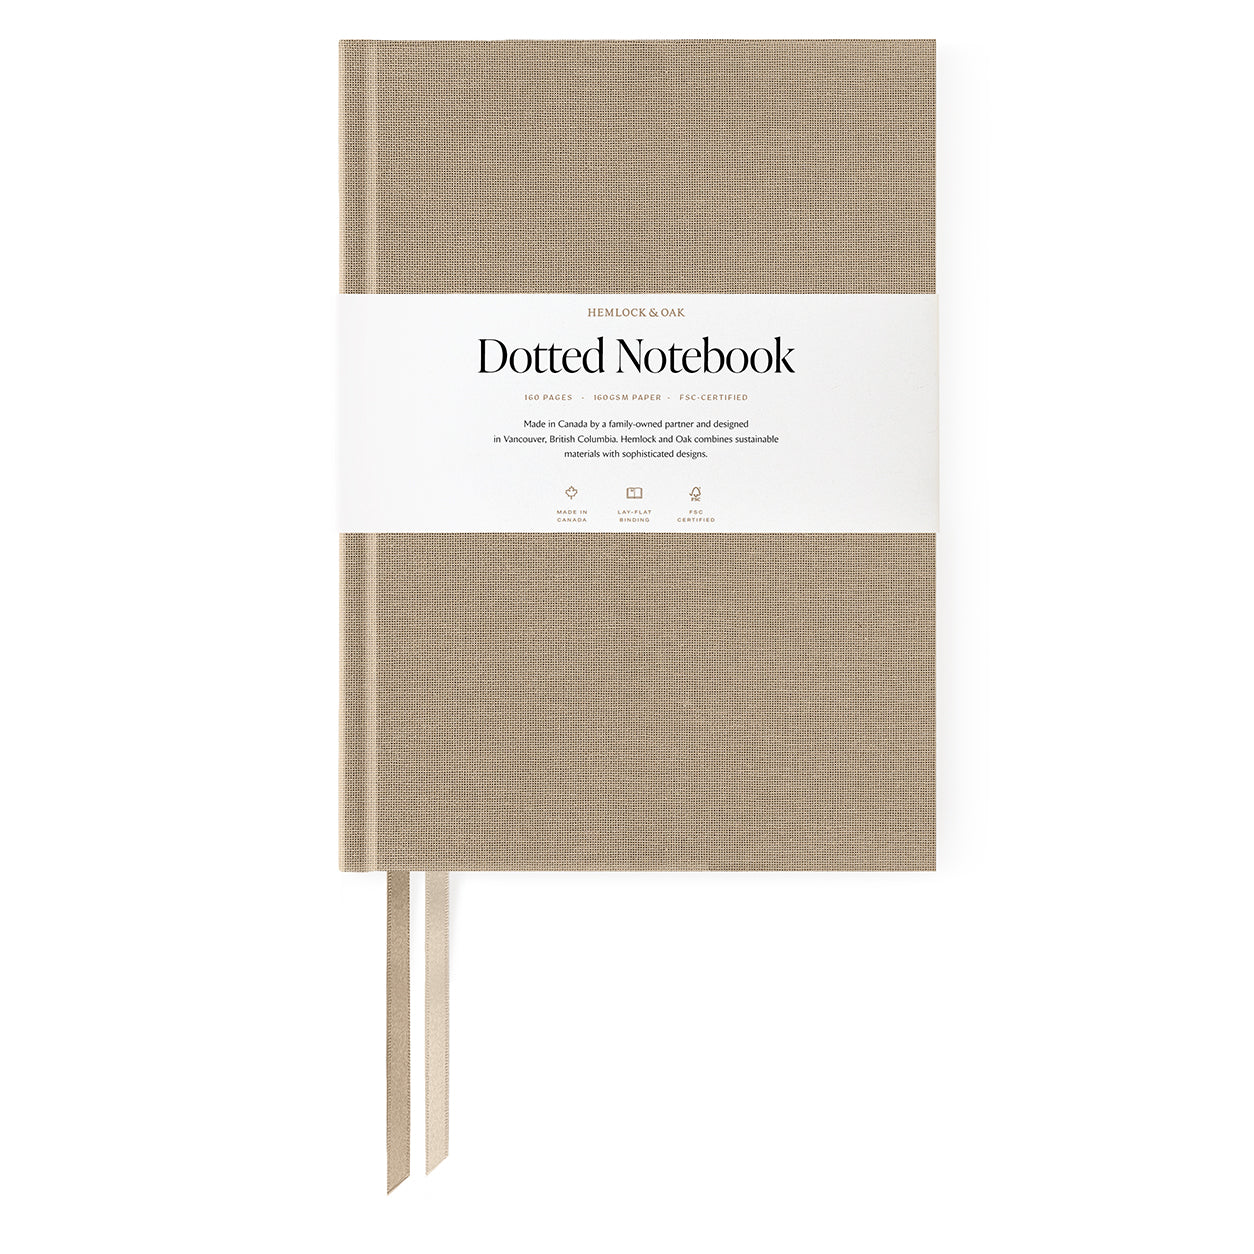 Notebooks (Imperfect) White Oak - Dotted Paper - No Foil #color_ White Oak - Dotted Paper - No Foil